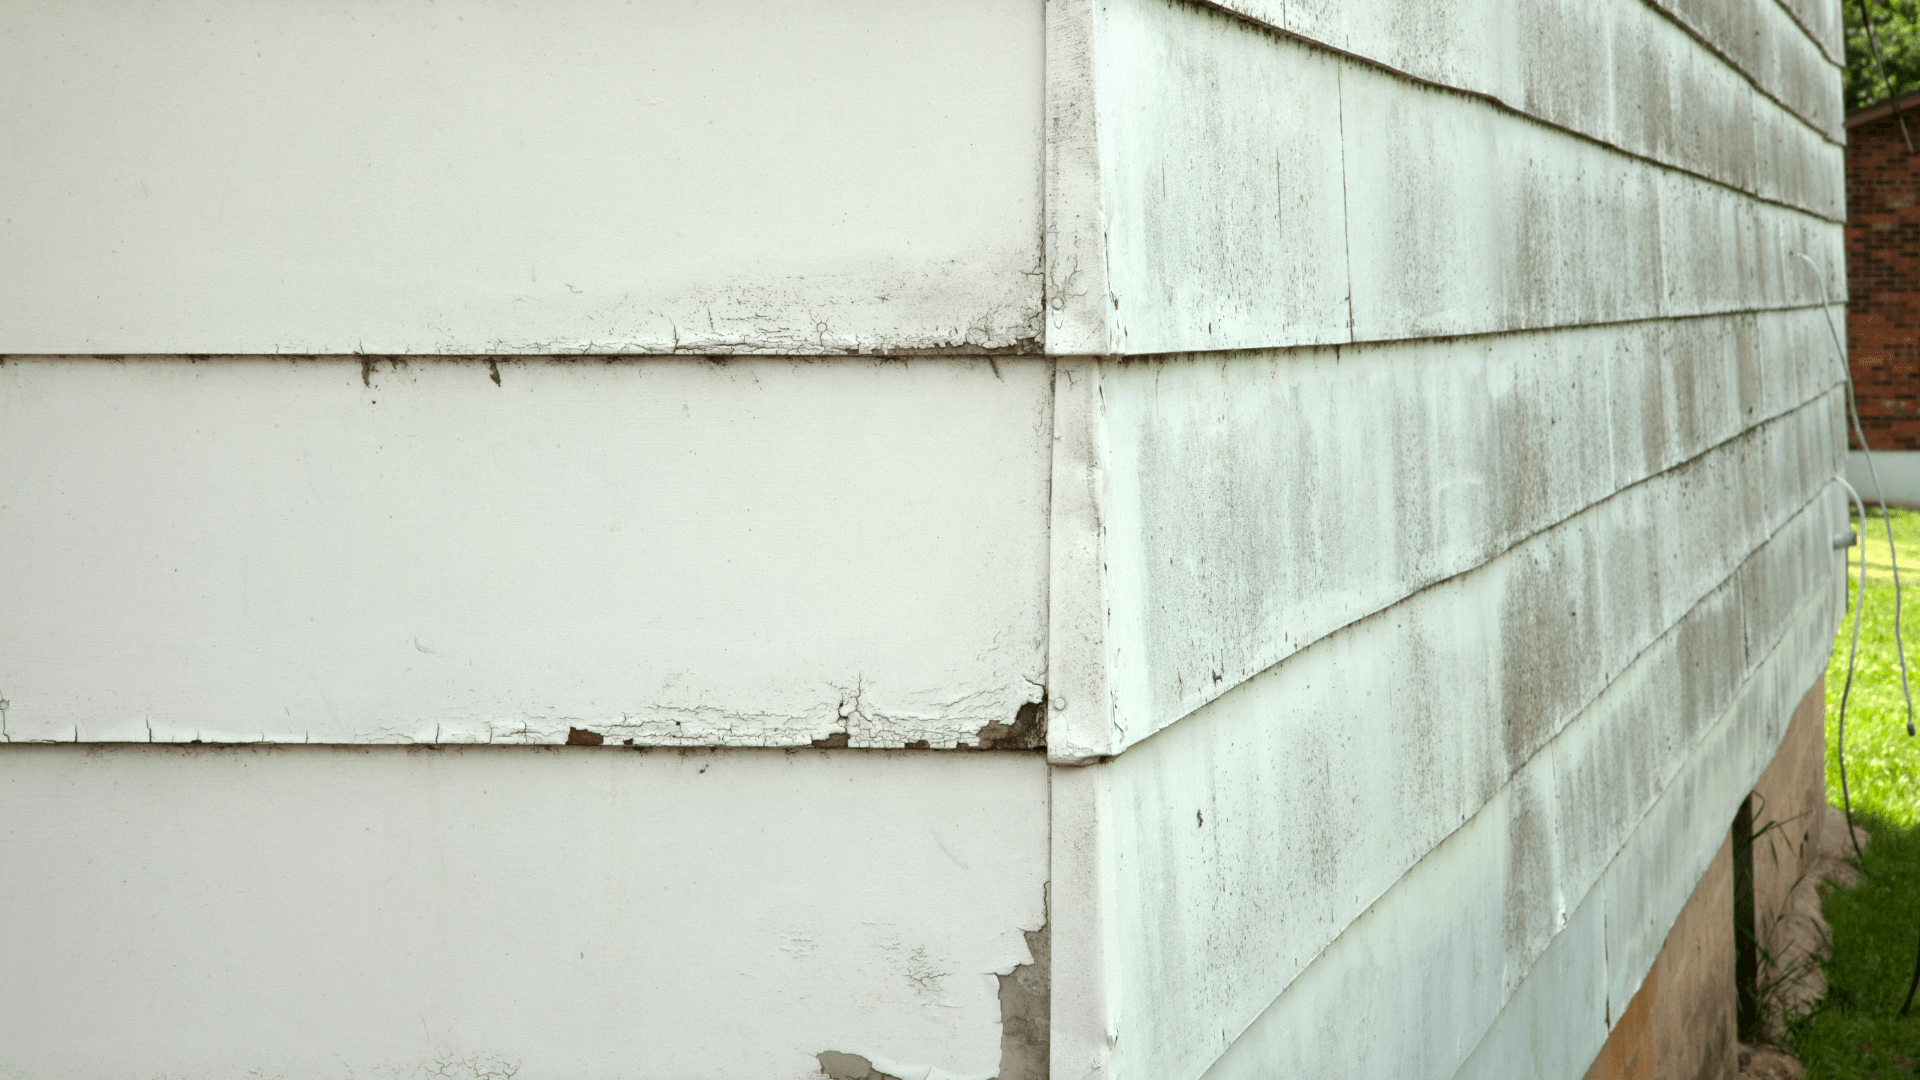 Siding replacement for your home's damaged siding by Preferred Home Improvement.